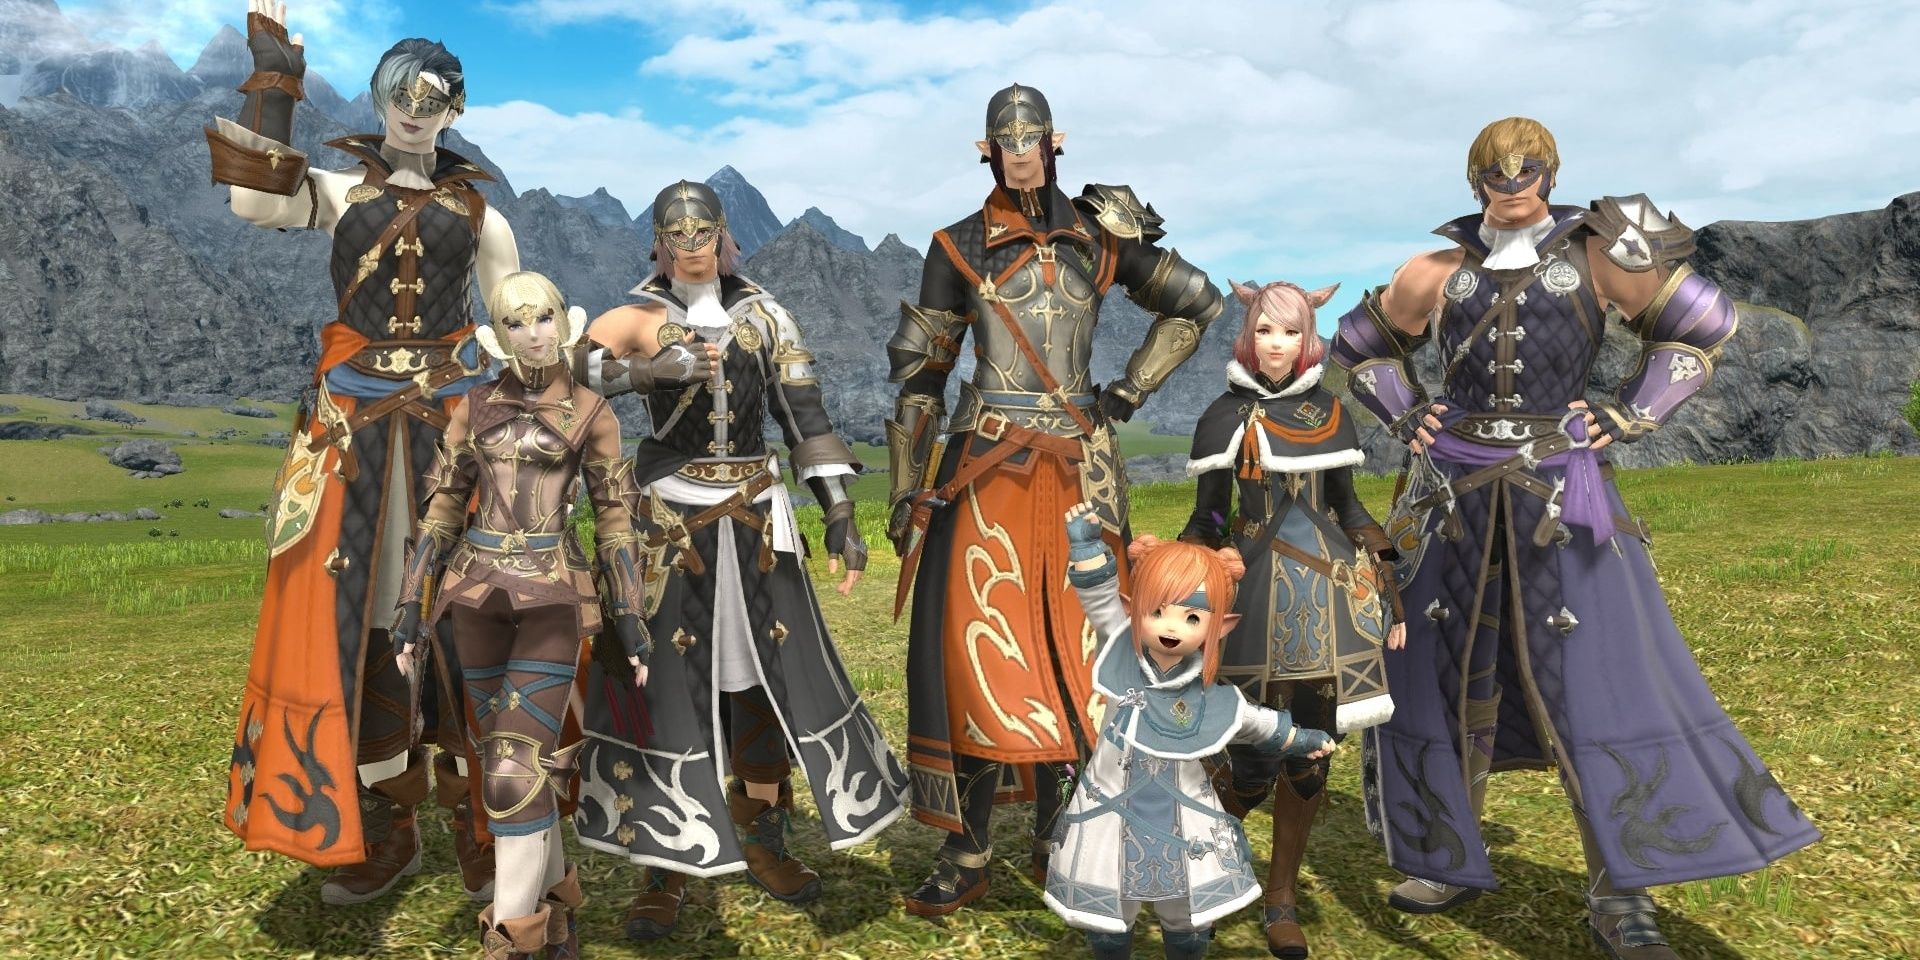 How To Use Group Pose In FFXIV